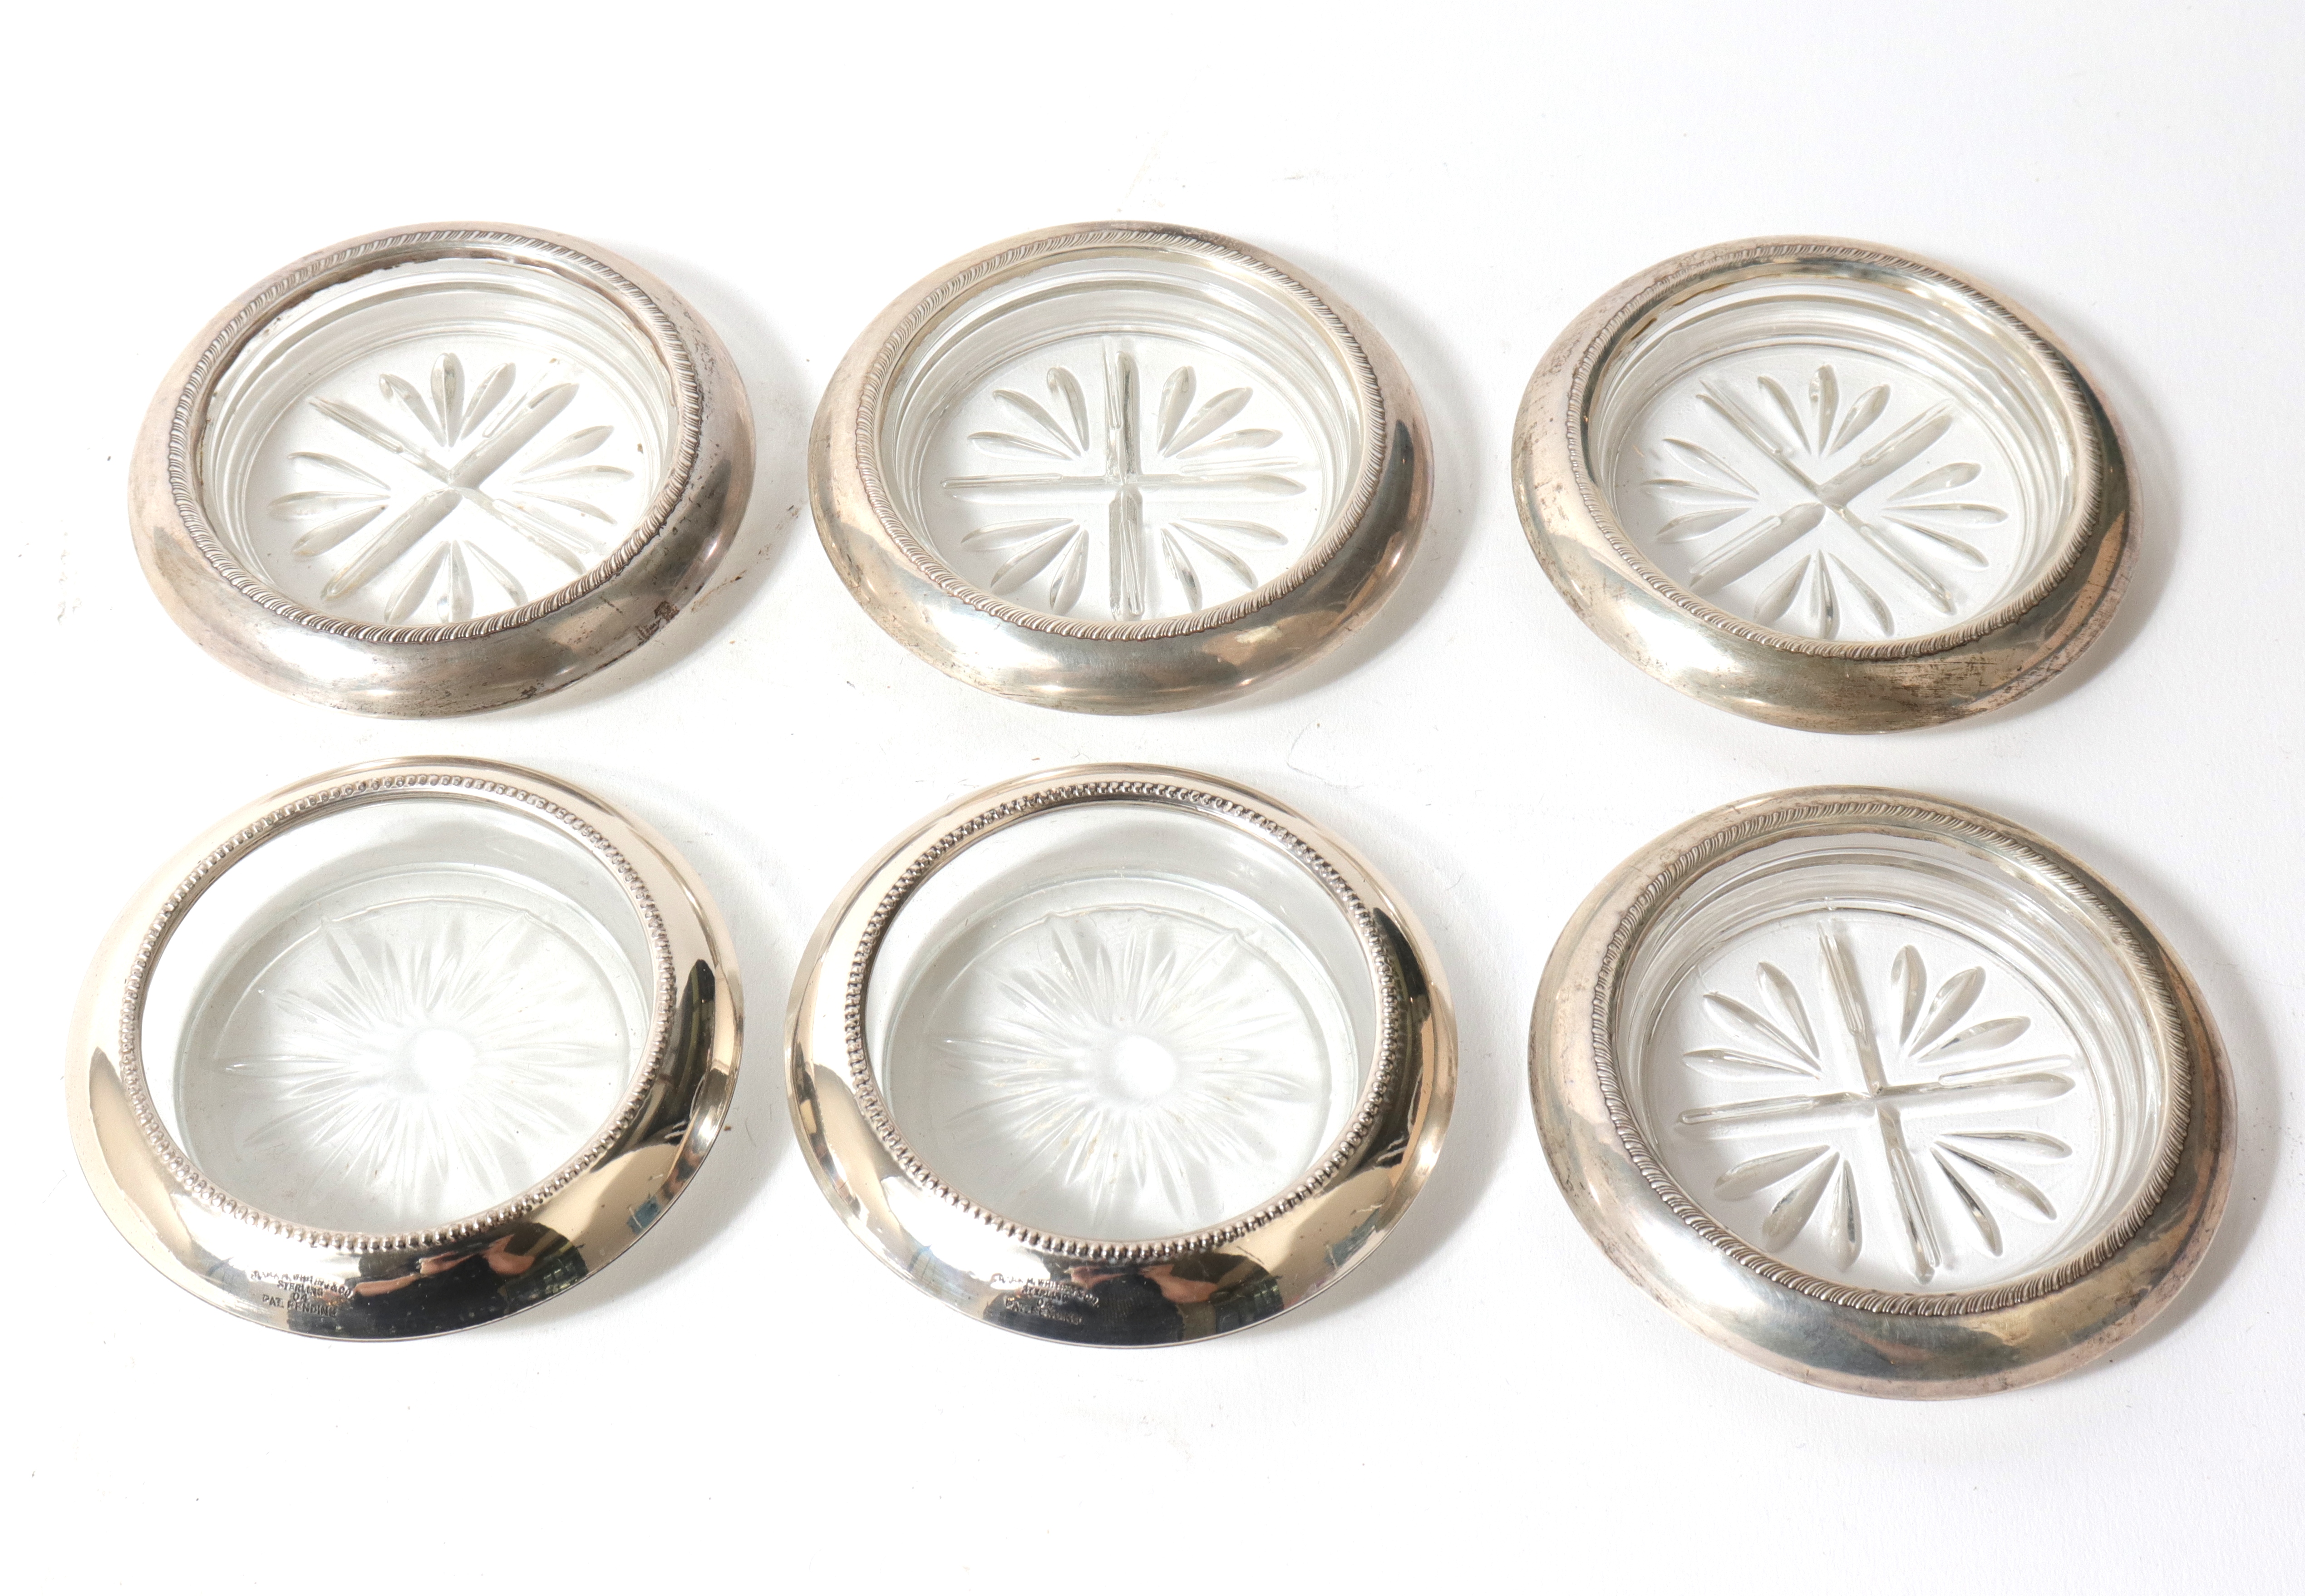 SILVER GLASS COASTERS SET OF 3c2a75